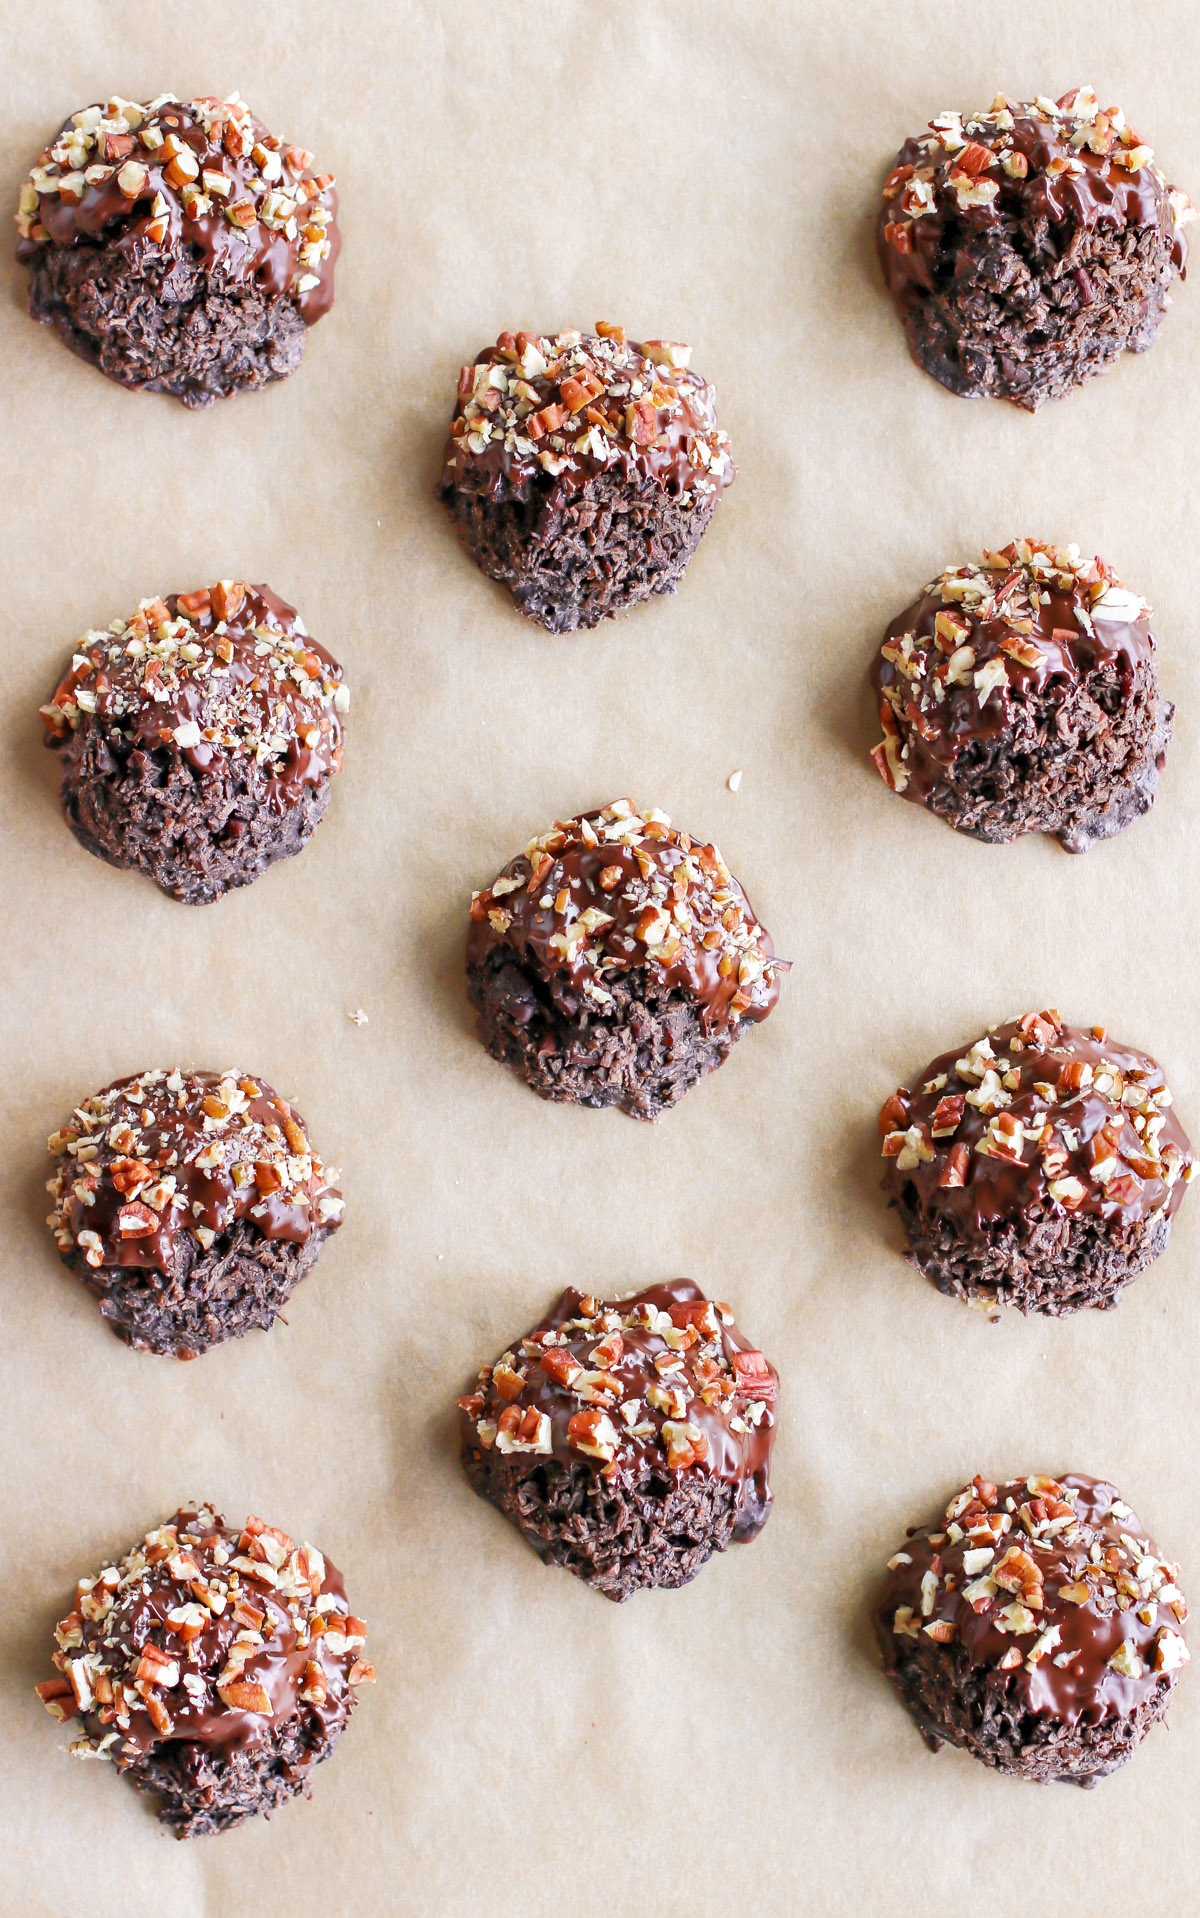 Gluten Free German Chocolate Cake Coconut Macaroons with chocolate, coconut, and pecans.